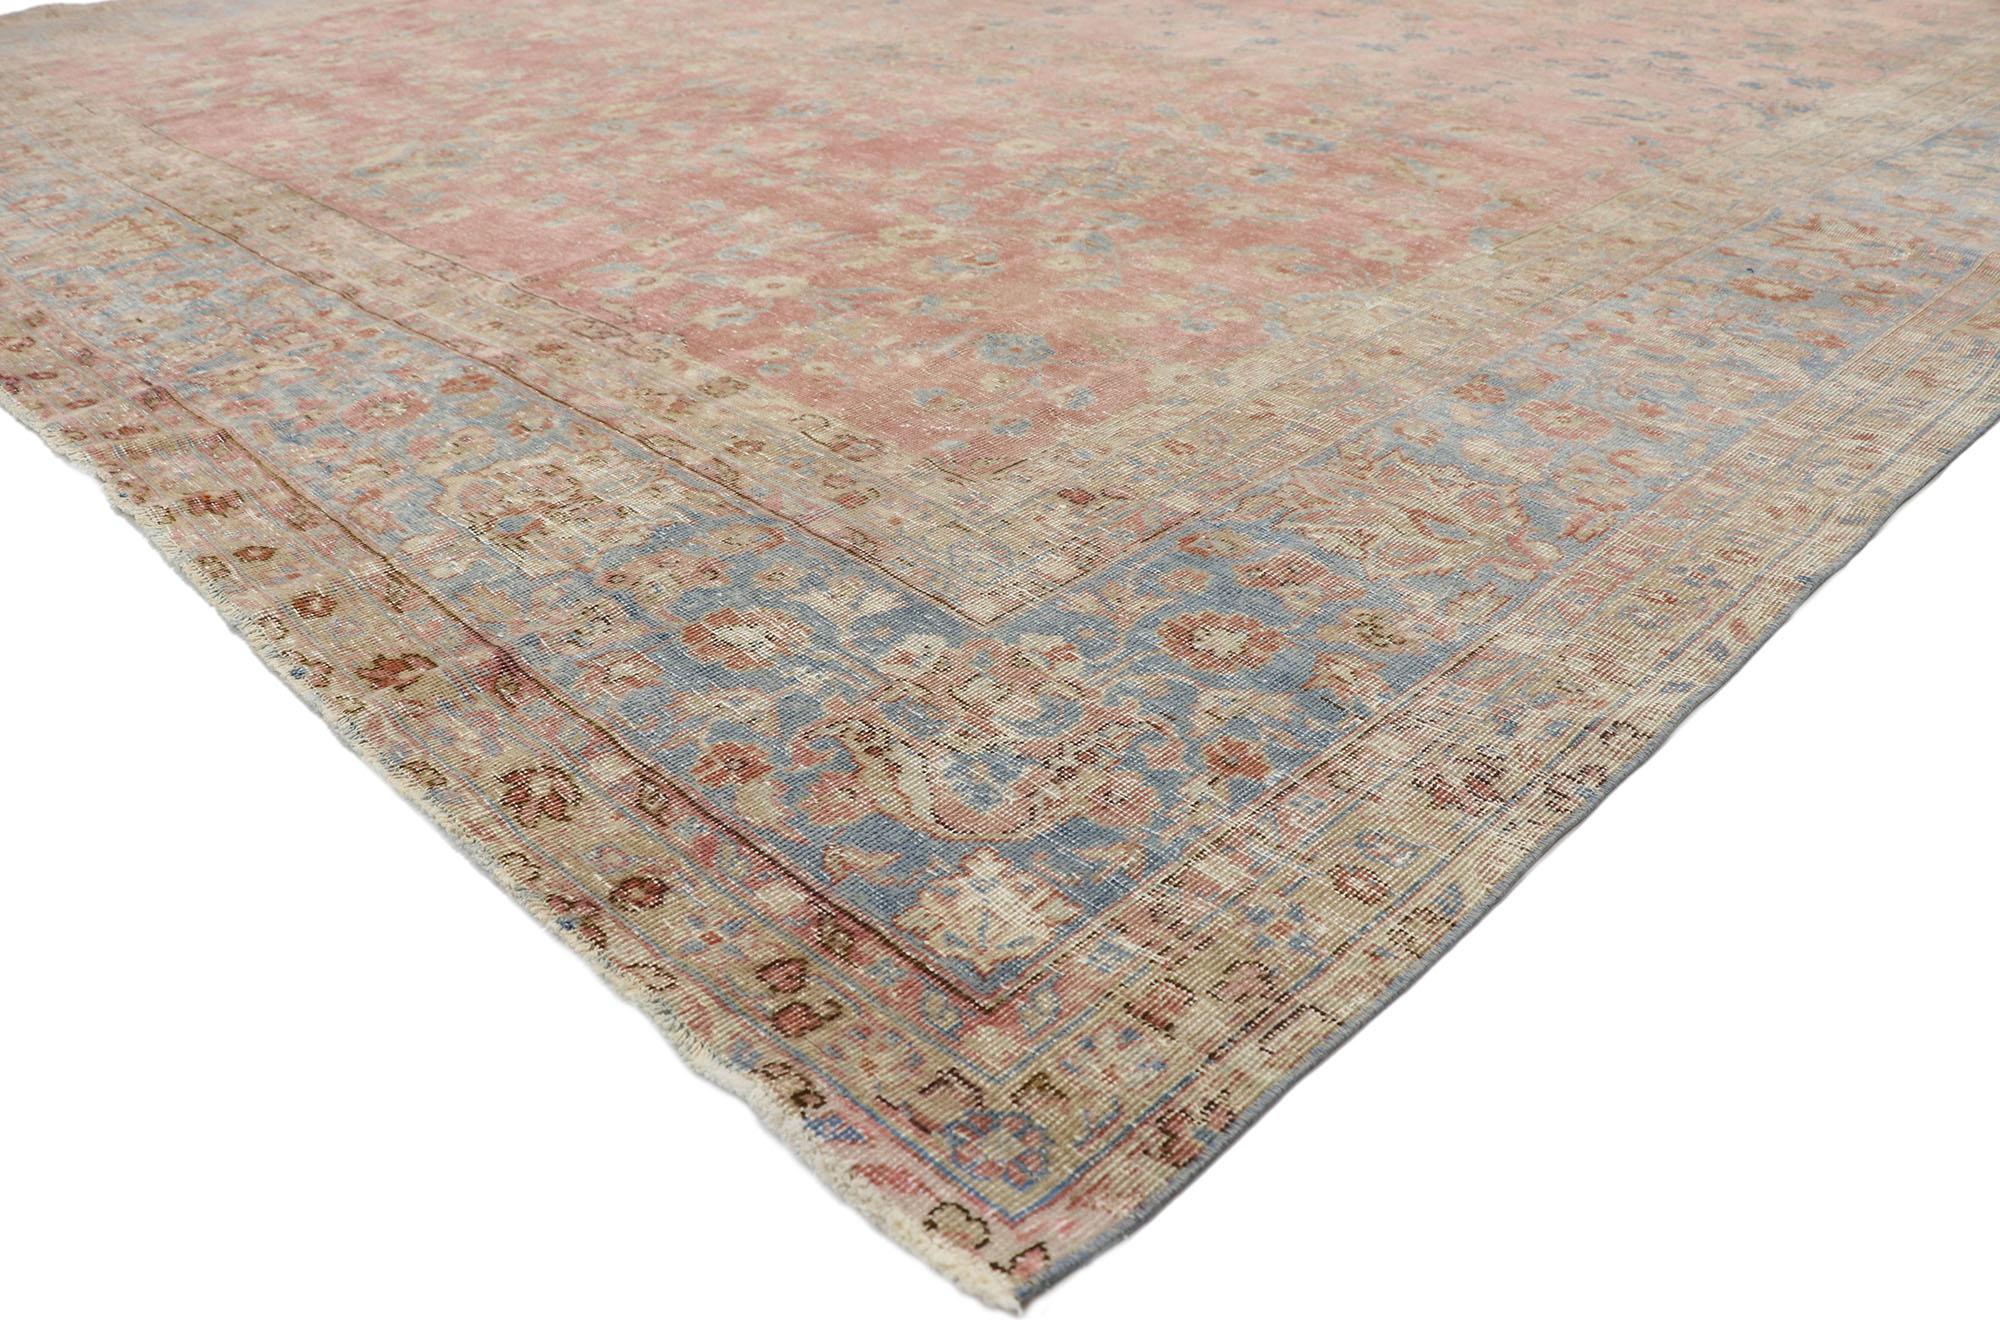 76756 Distressed Antique Indian Rug, 11'05 x 16'01.
Regencycore meets rustic sensibility in this hand knotted wool distressed antique Indian rug. The highly decorative details and pastel colors woven into this piece work together creating a